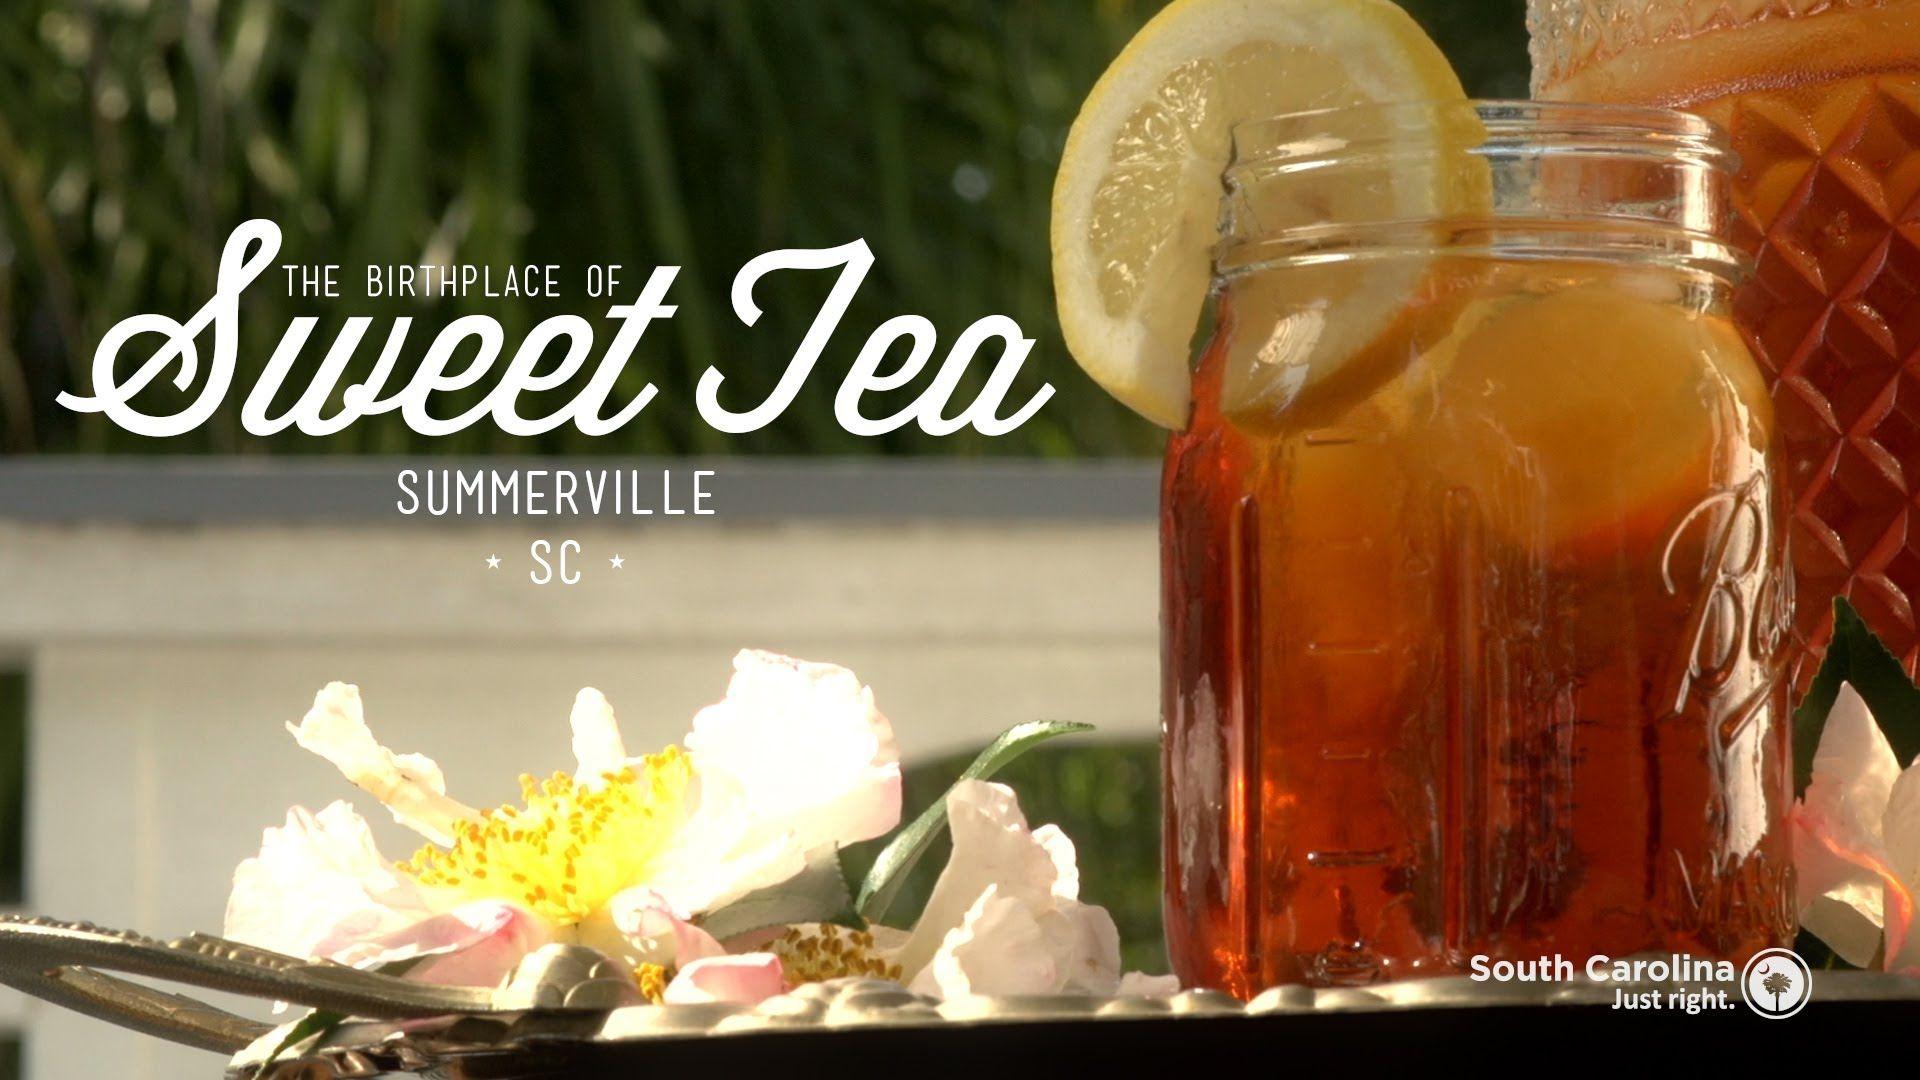 The Birthplace of Sweet Tea.